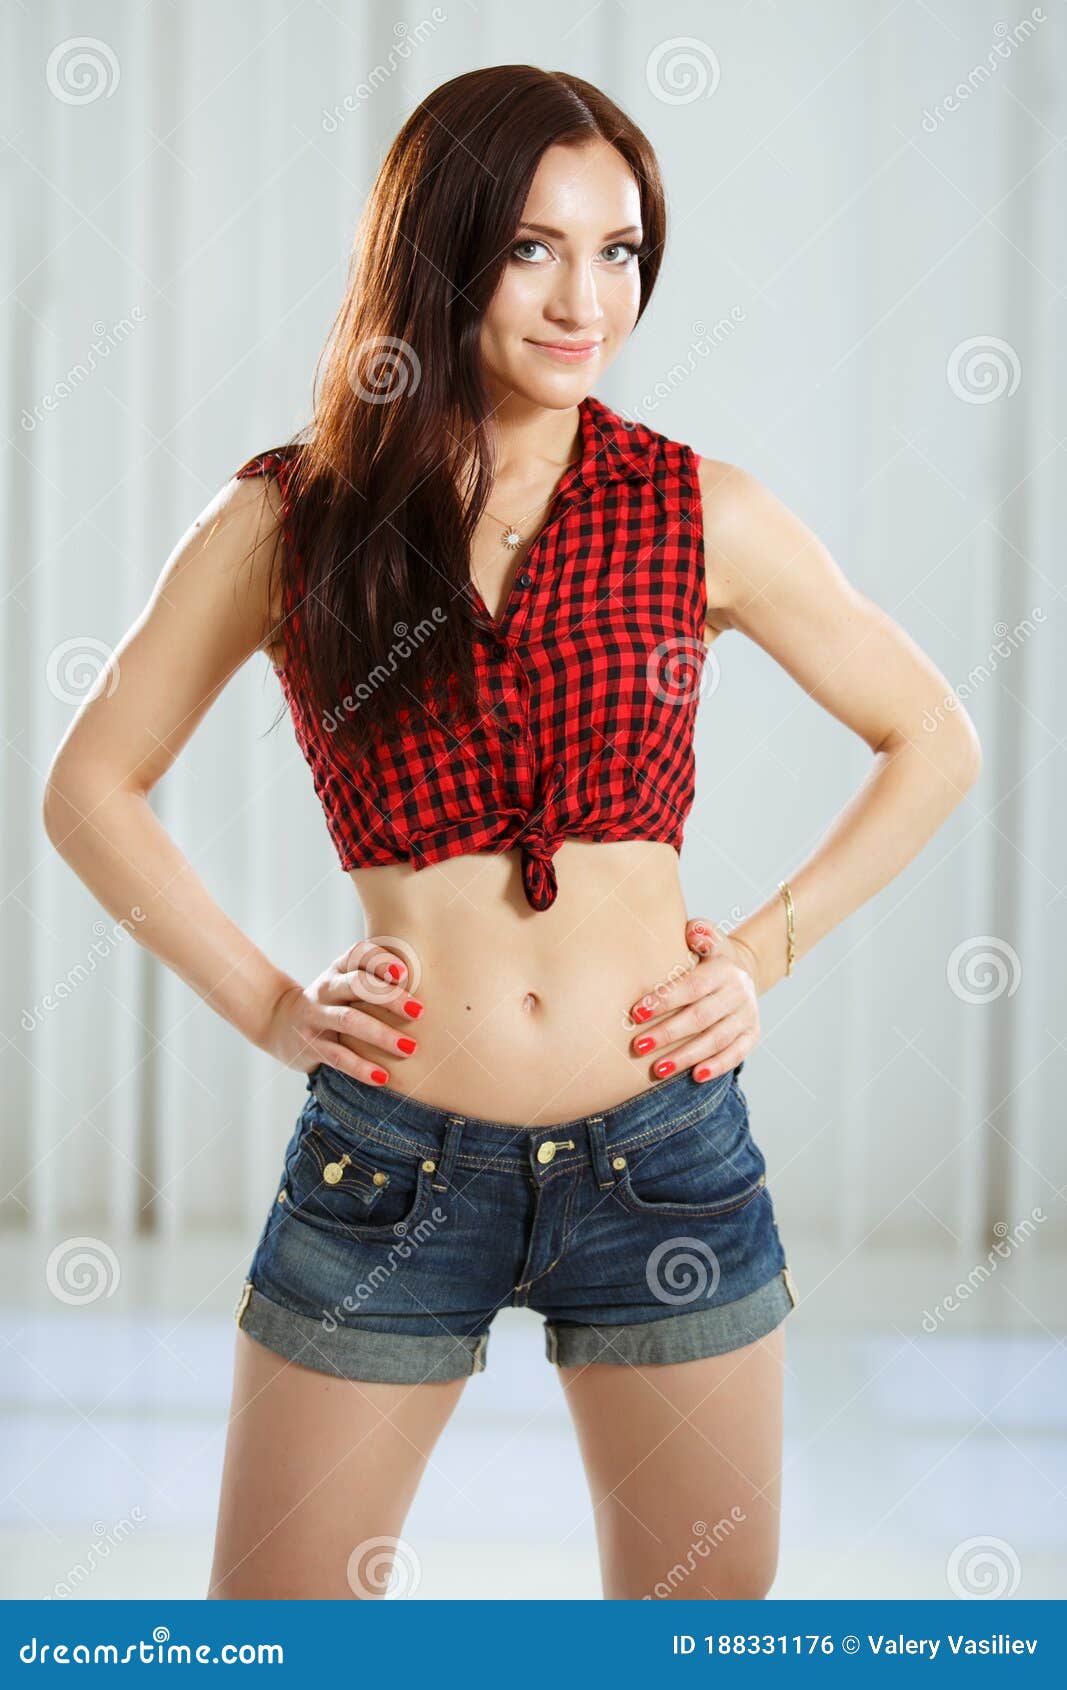 alex gentle recommends cowgirls in short shorts pic